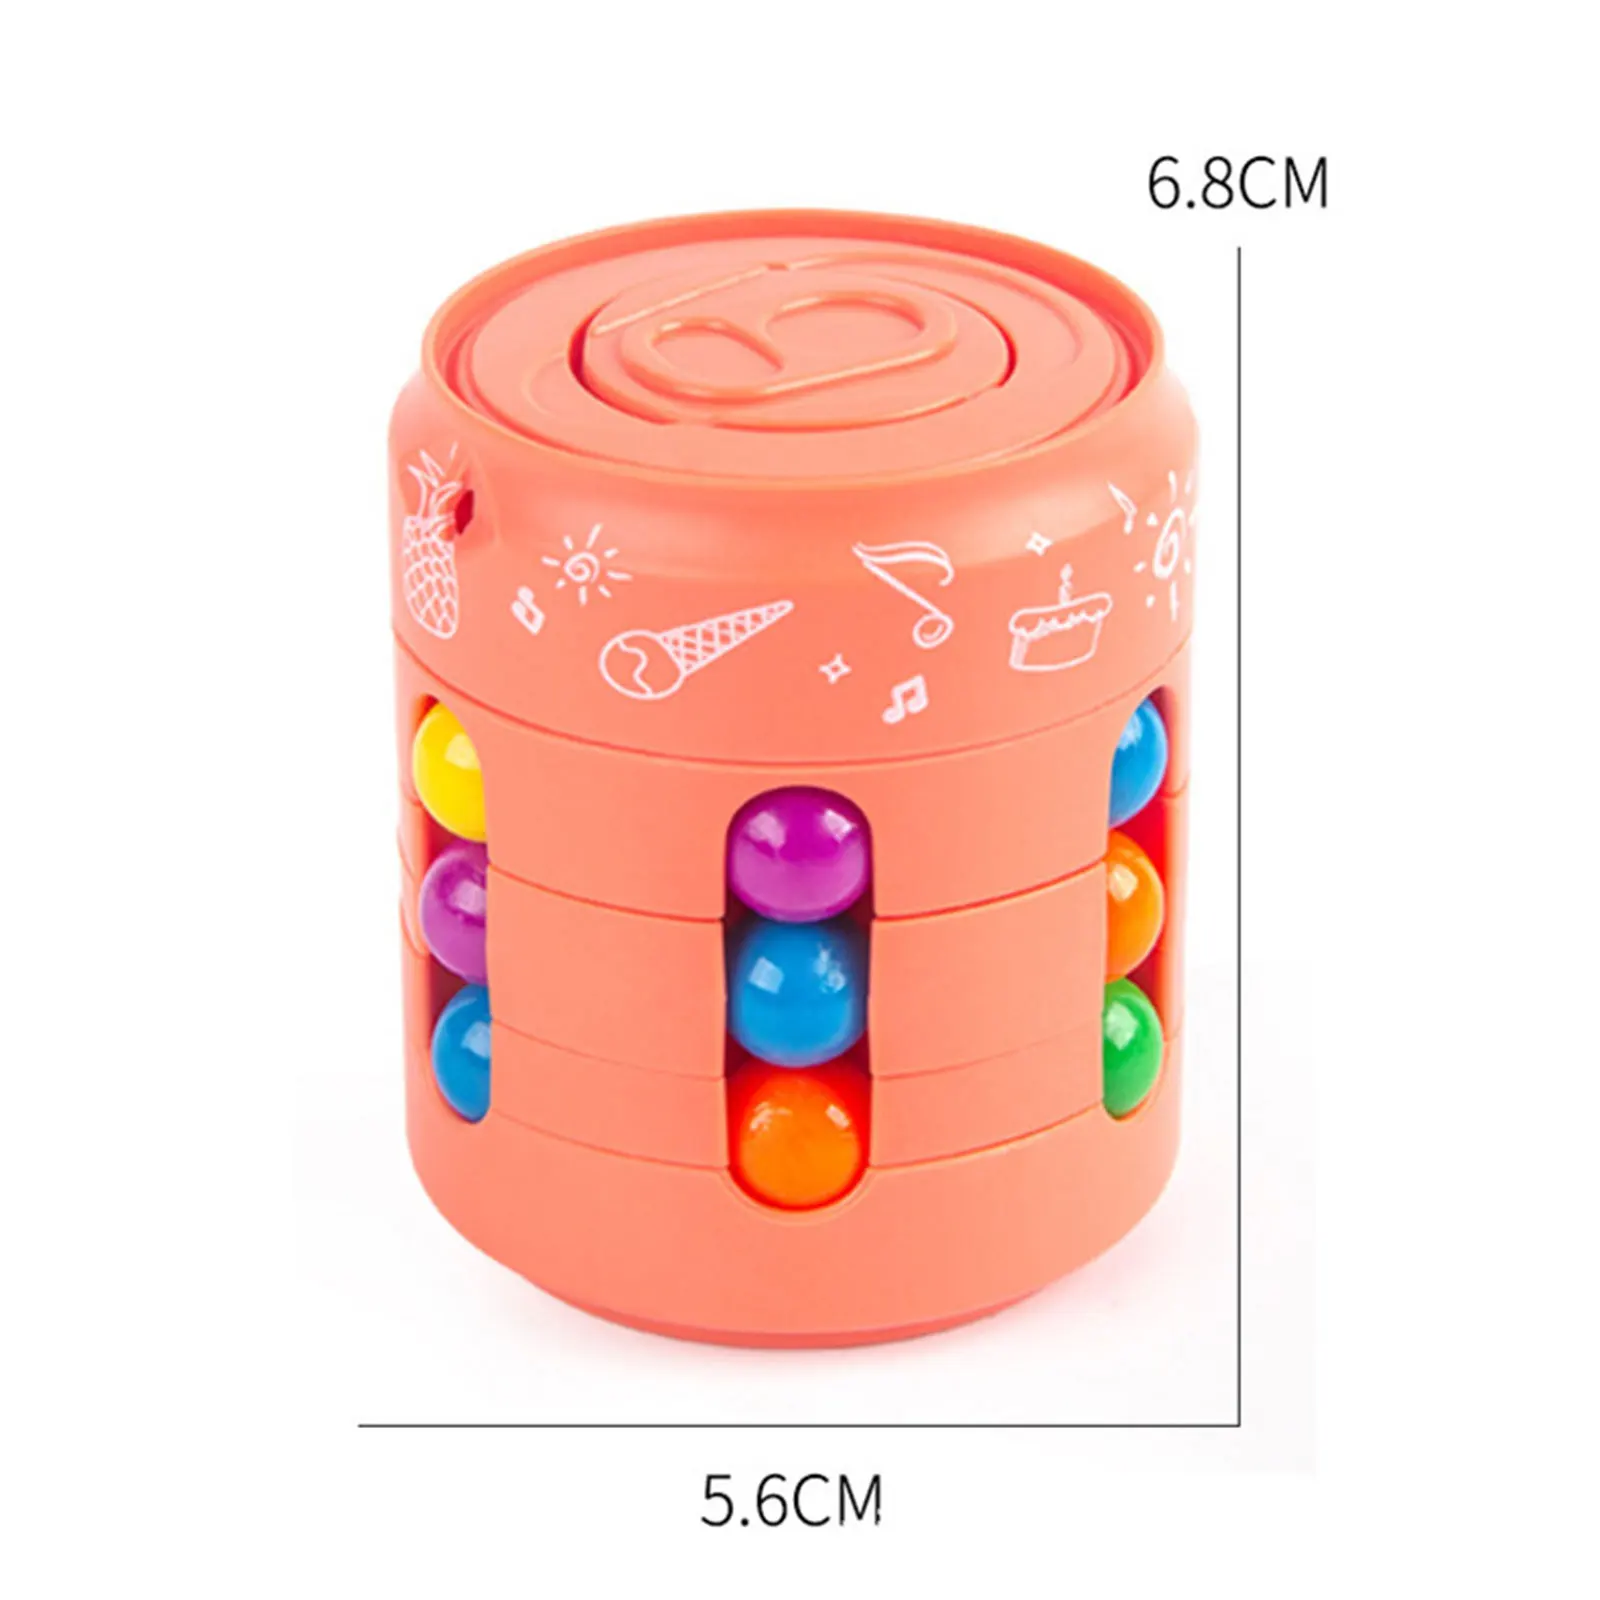 

Anti Stress Cube Can Spinning Top Little Magic Bean Pops Stress Relief Toy Children's Decompression Relax Pressure Fidget Toys